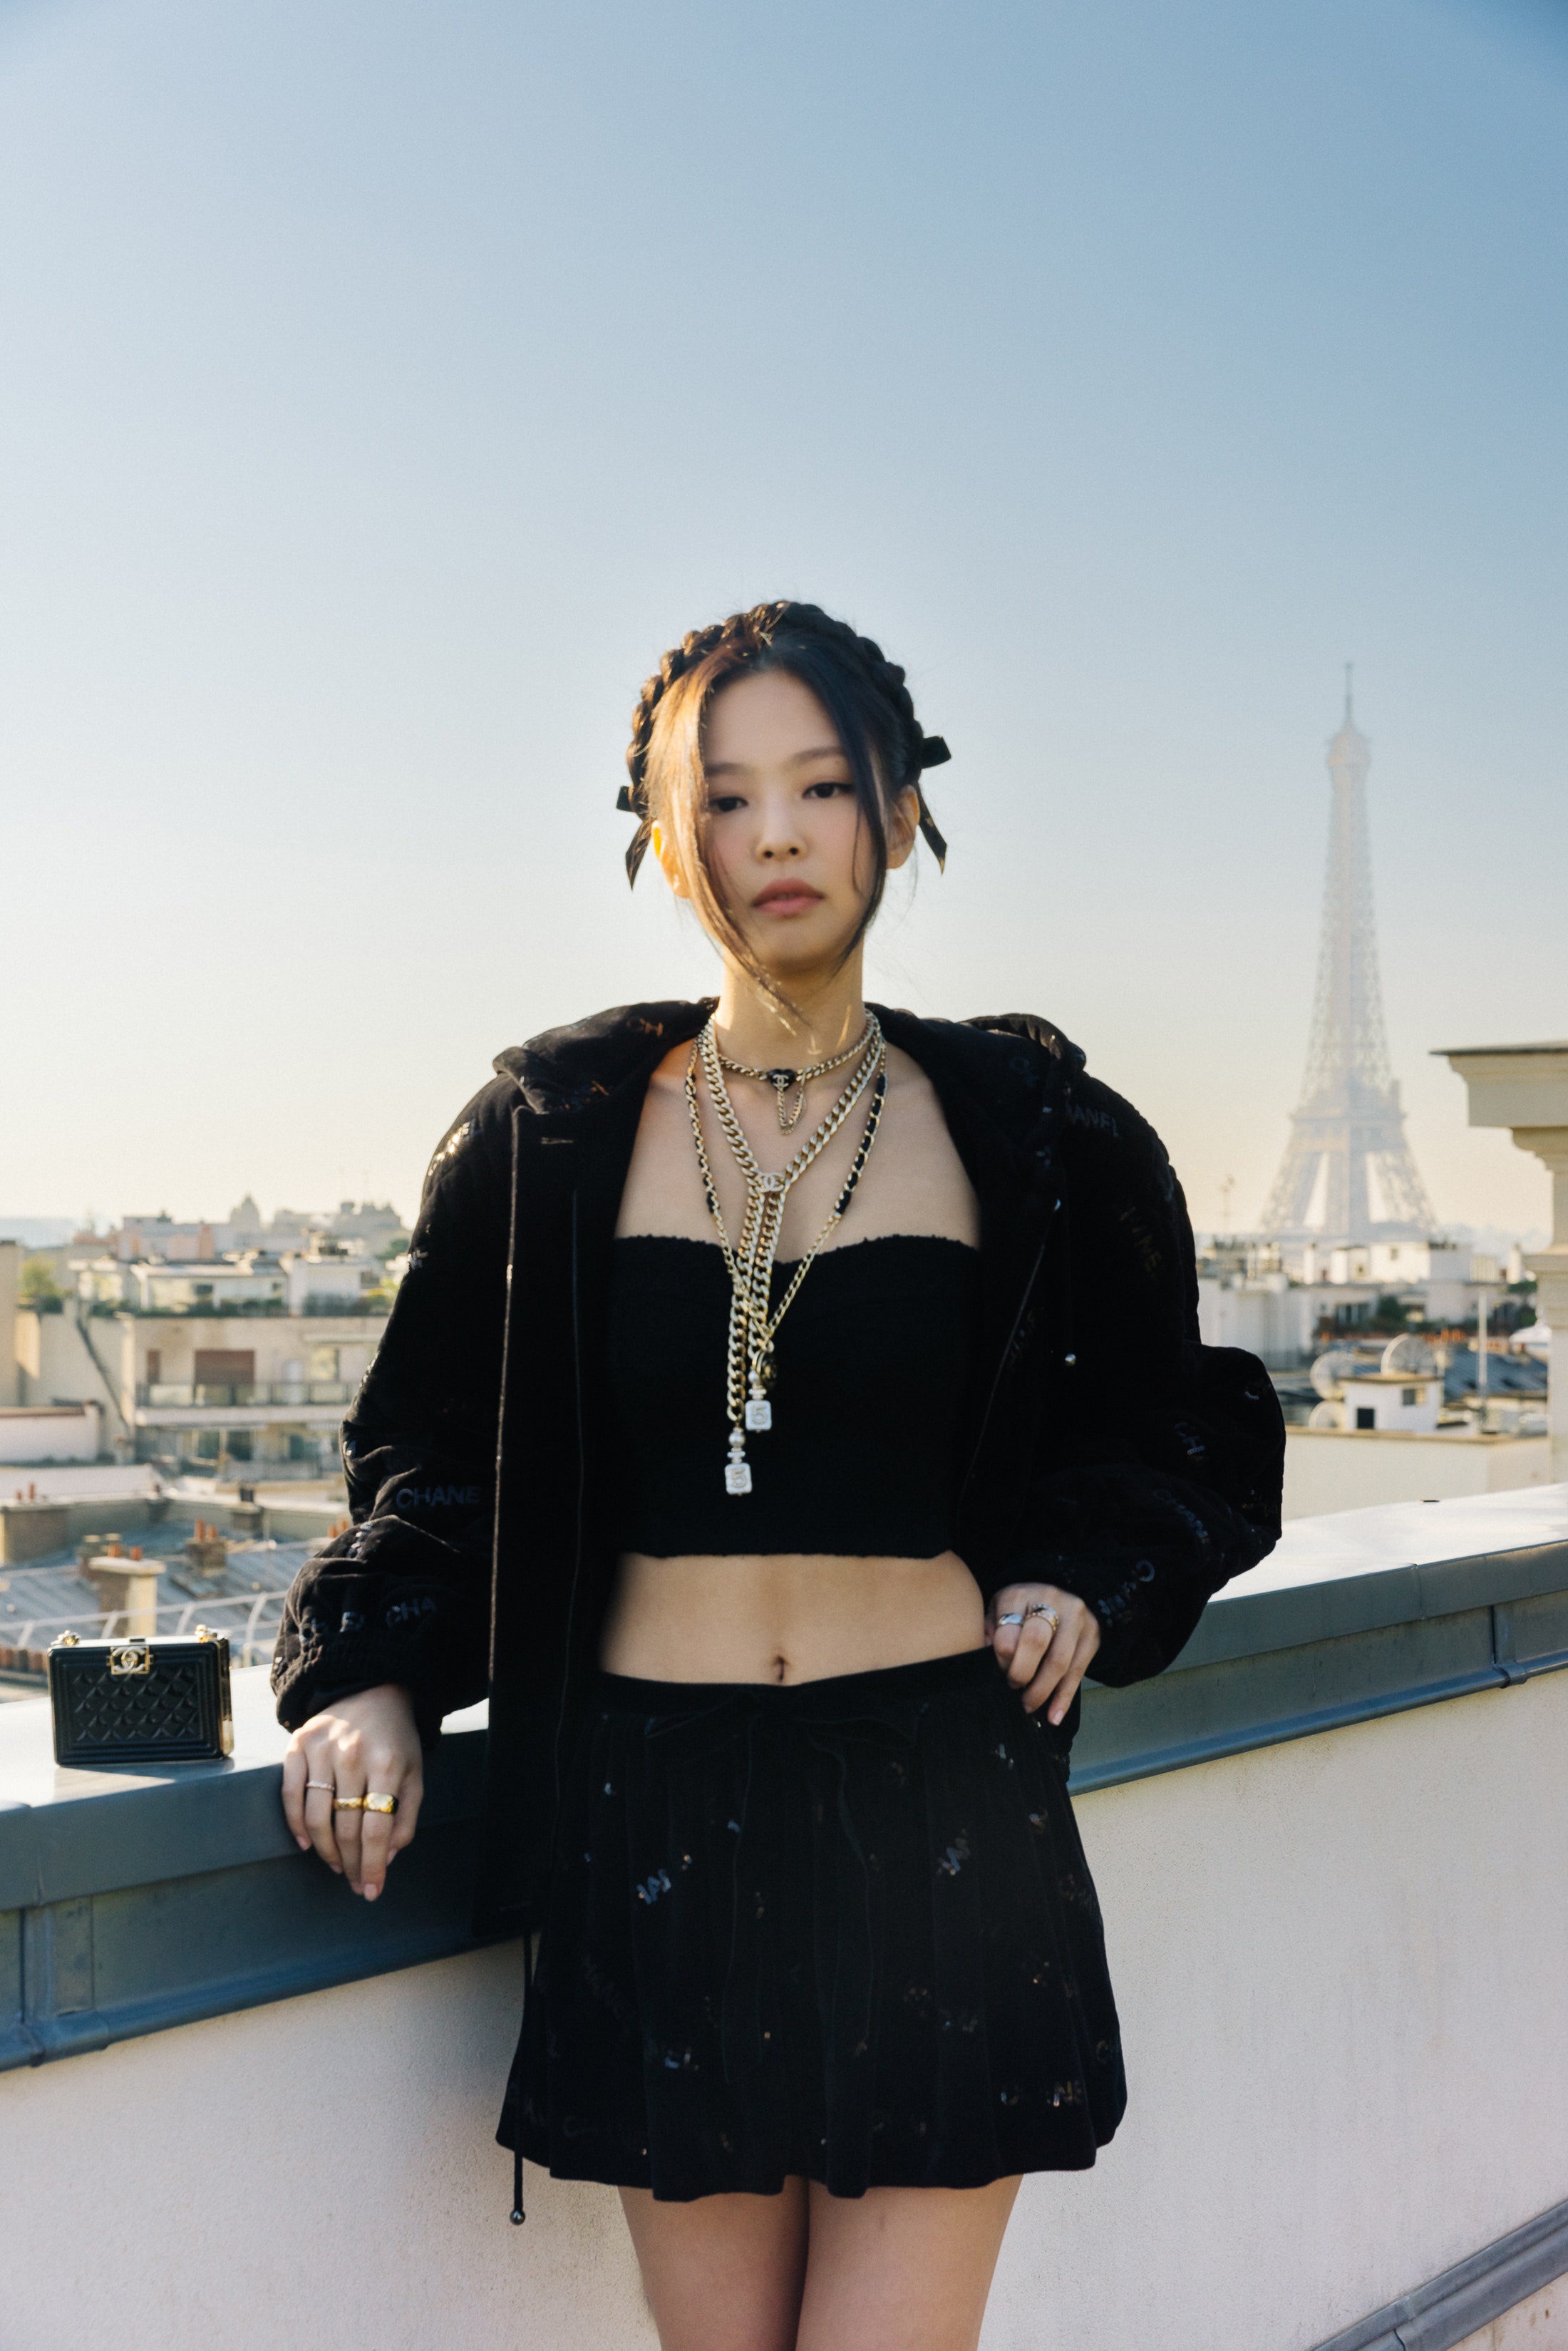 Behind The Scenes With Blackpink's Jennie At Chanel's AW22 Show